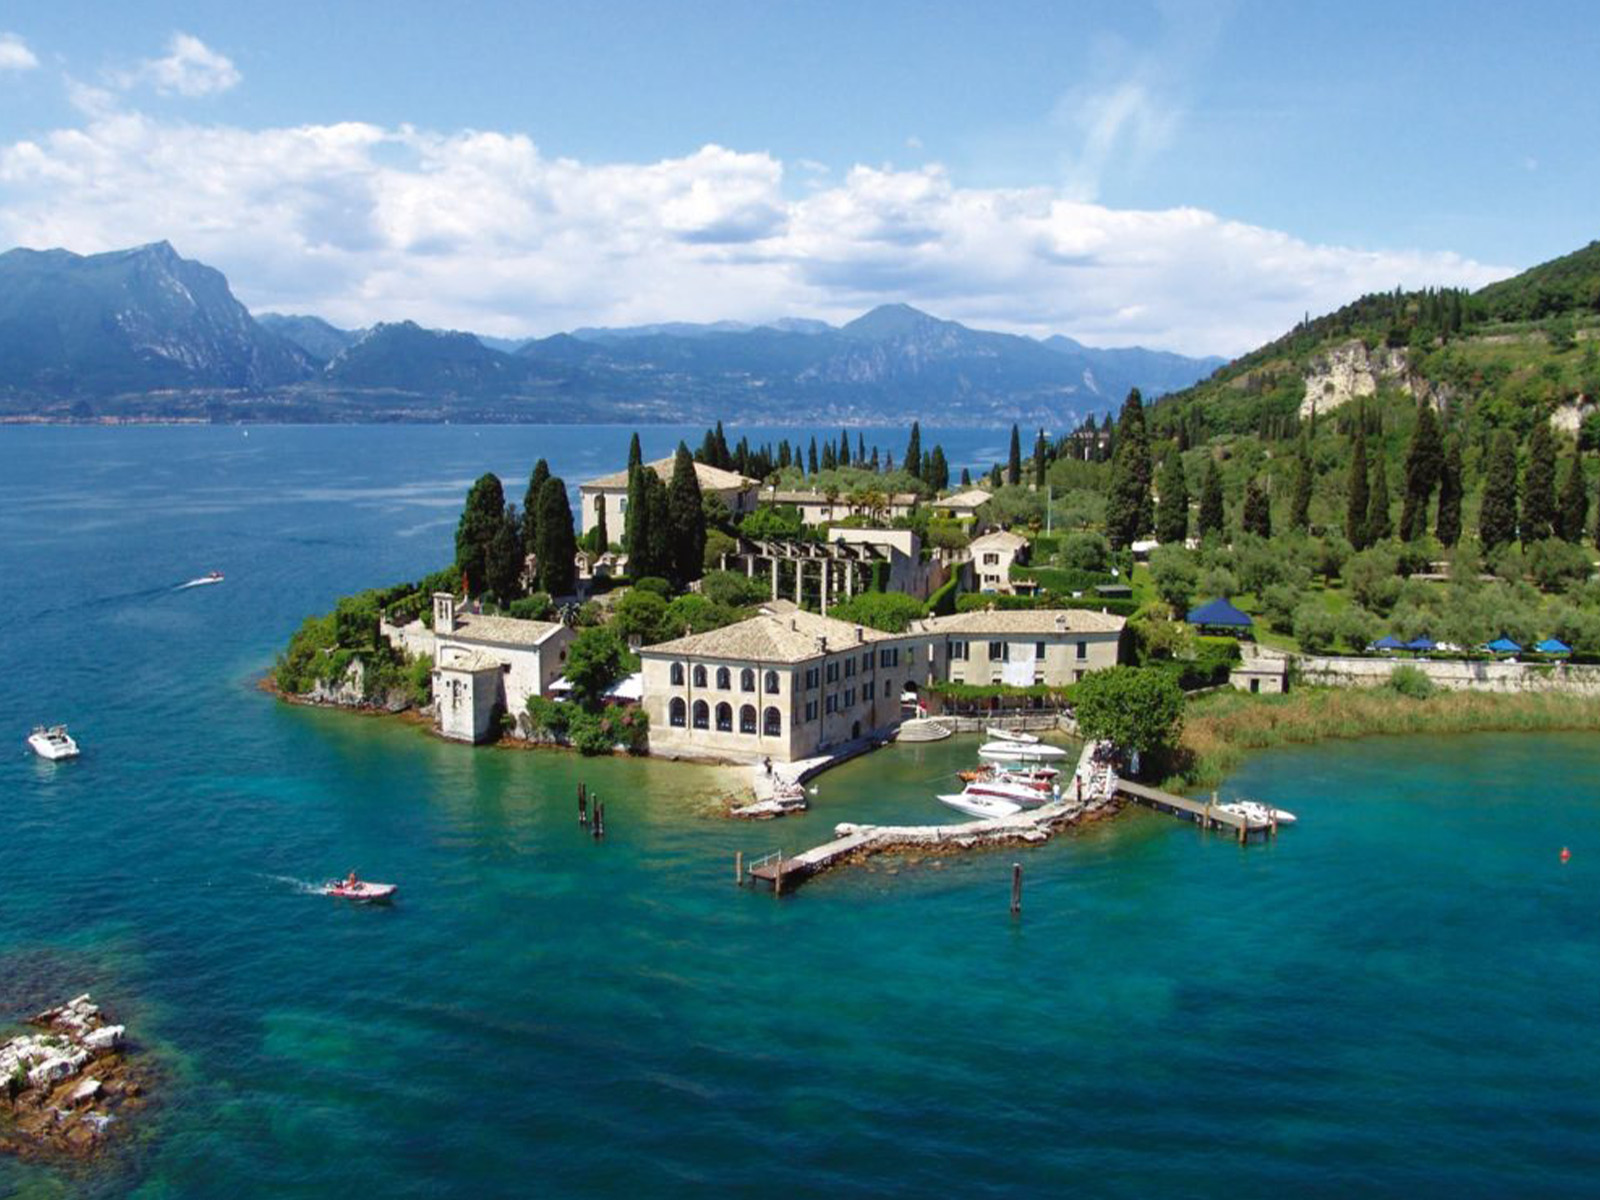 Wedding Venues on Lake Garda - The Different Twins